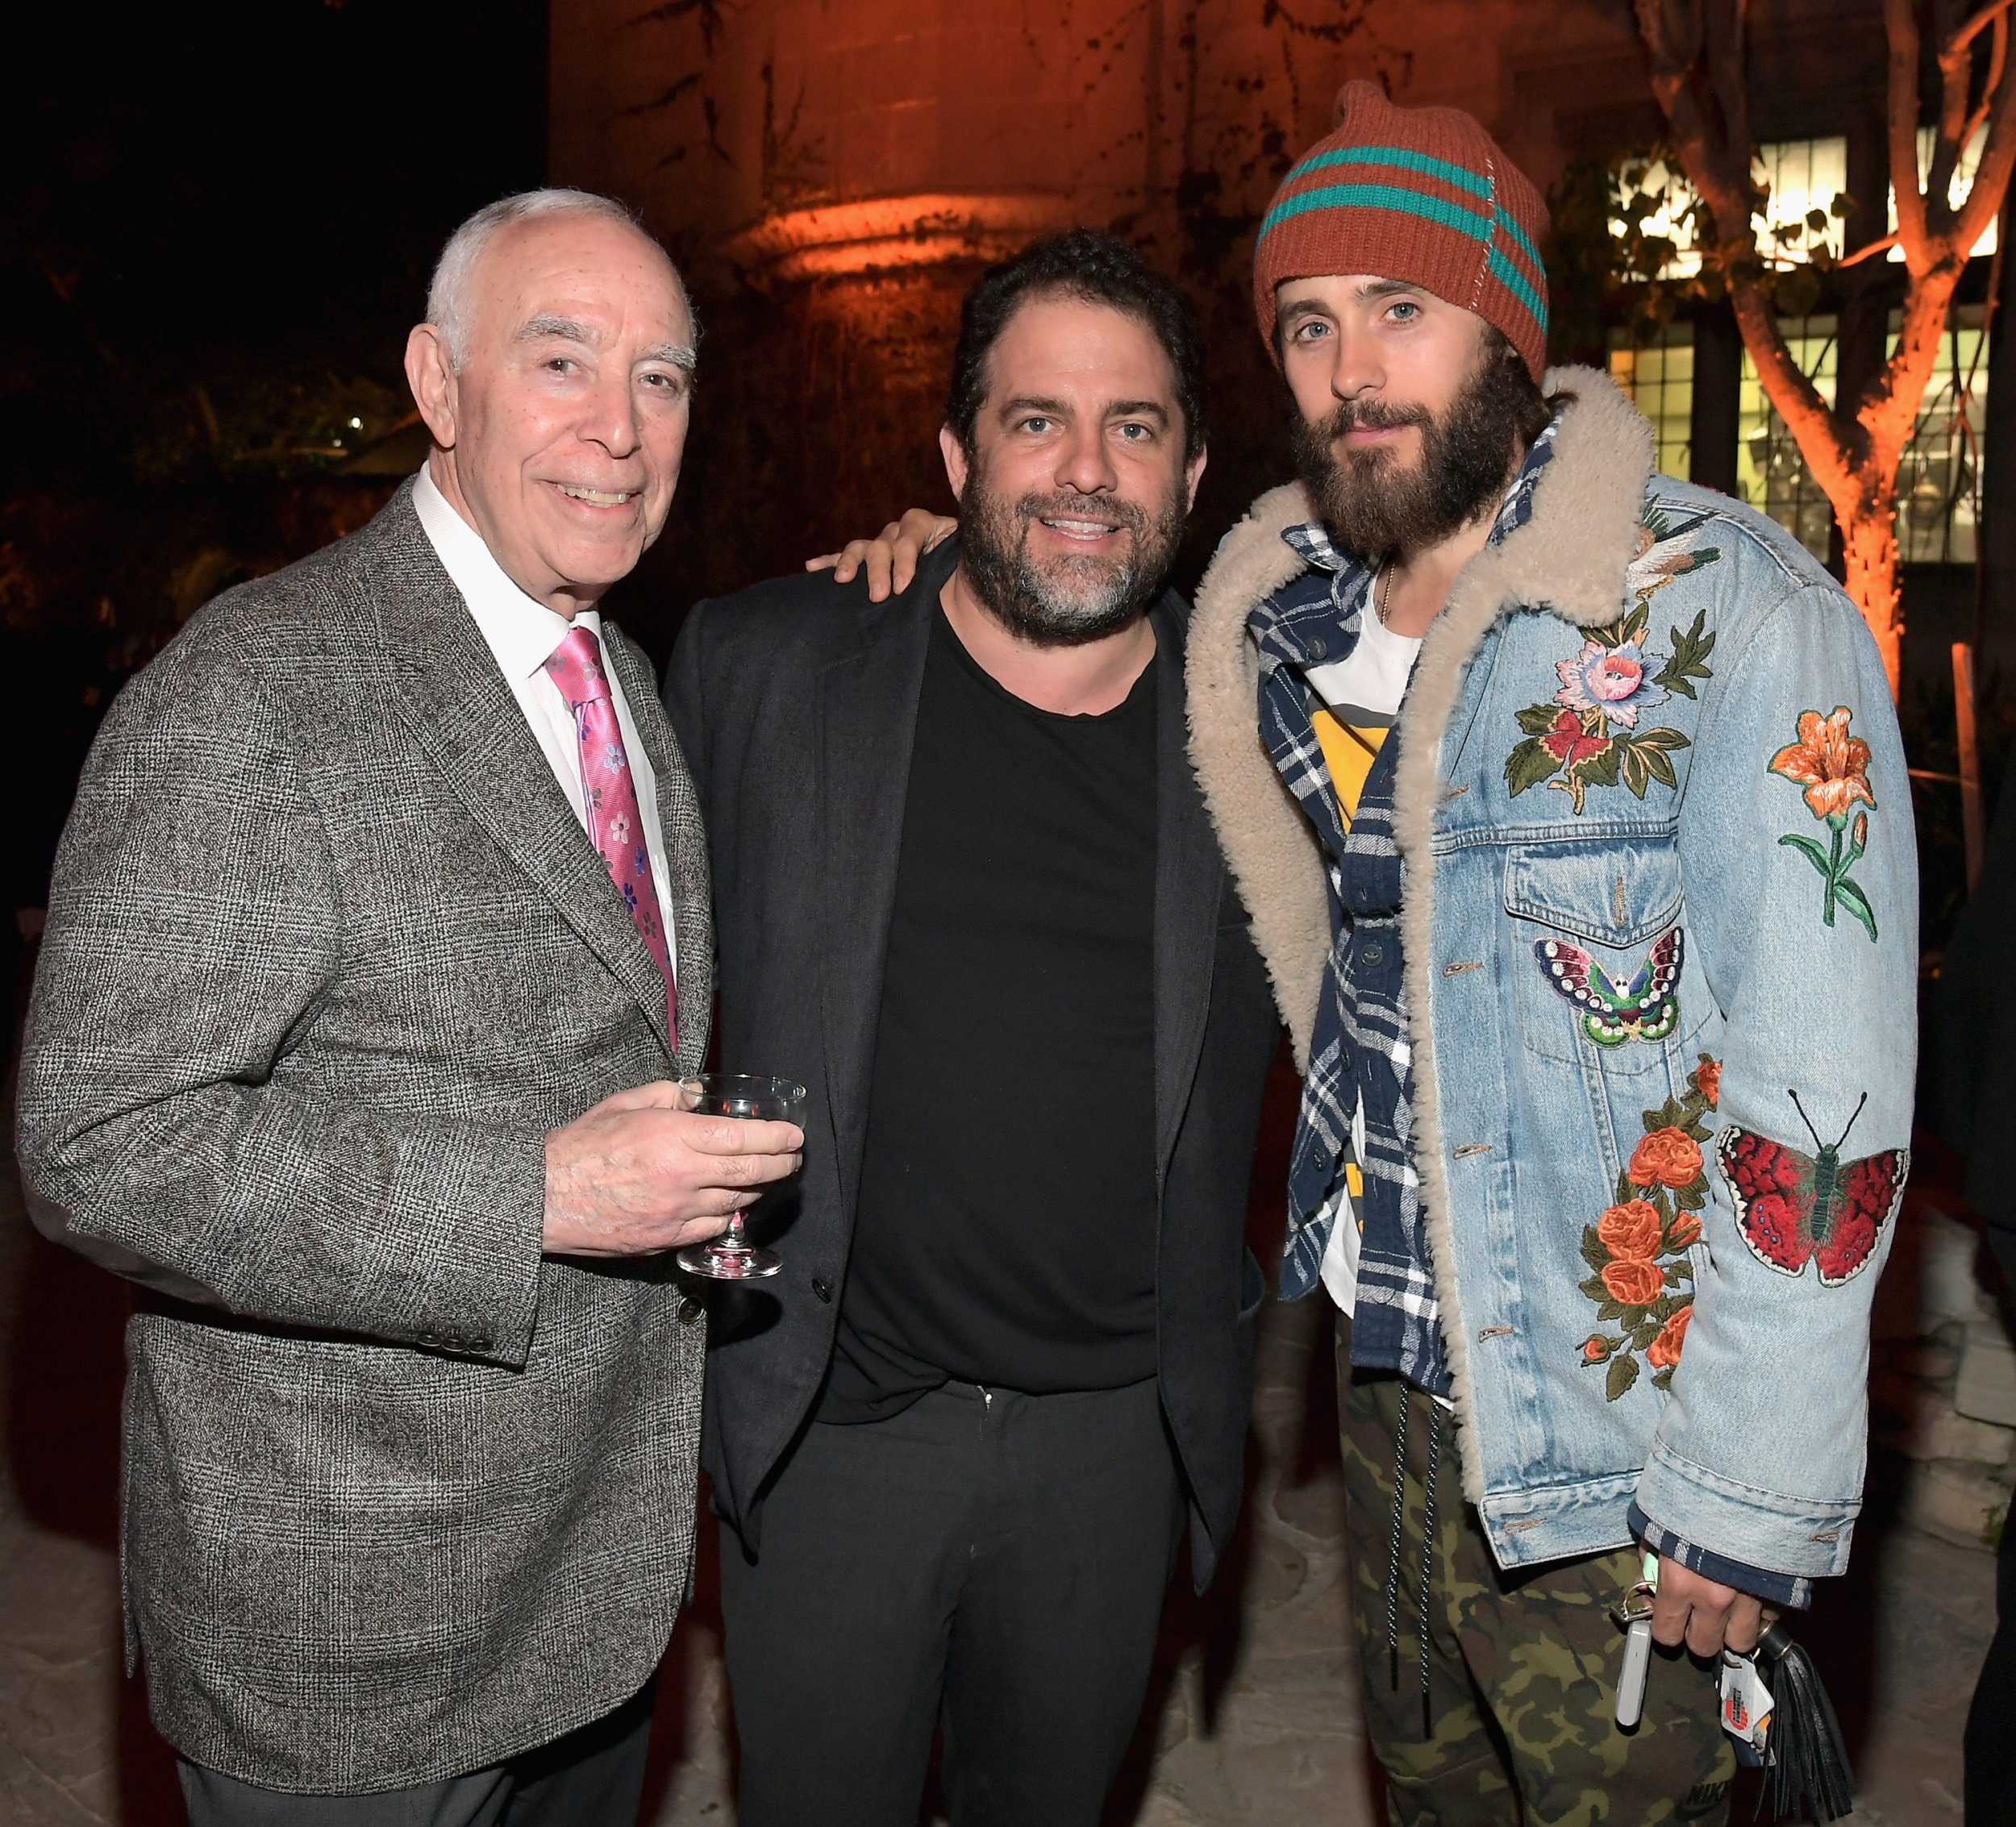  Executive producer Dick Rosenzweig, producer Brett Ratner and actor Jared Leto